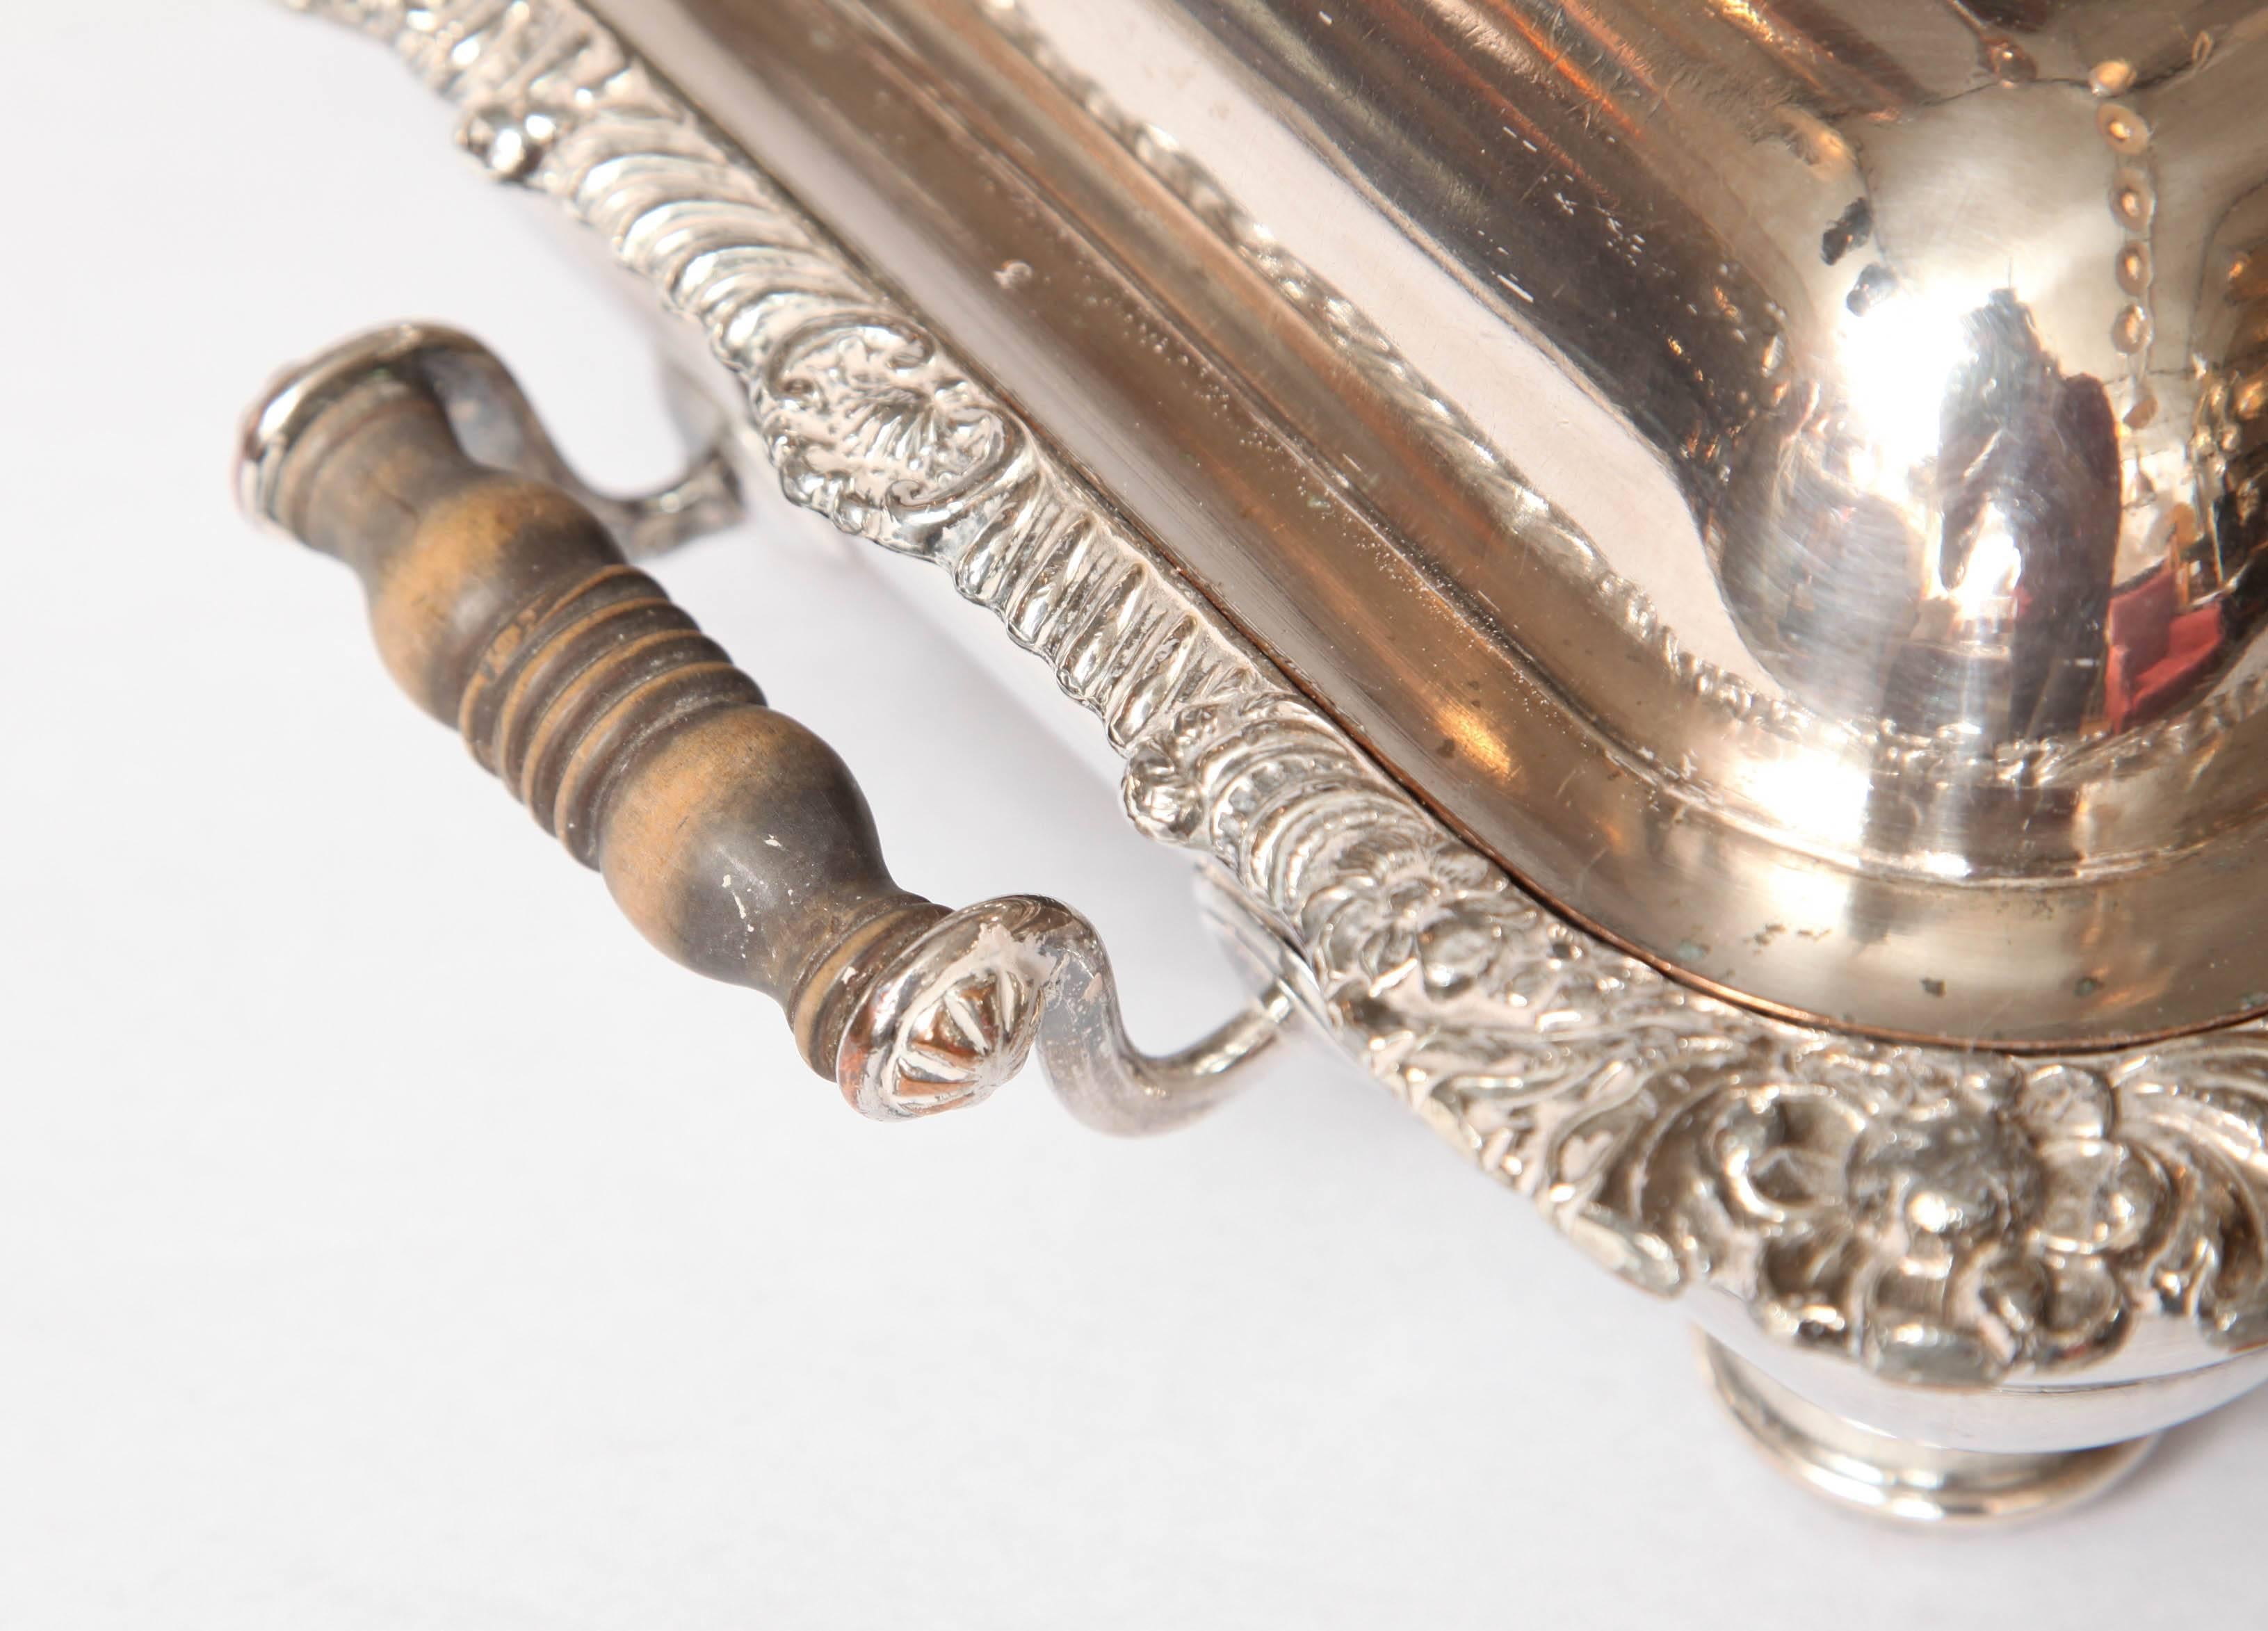 Silver serve-ware from a British Estate in the first half of the 19th century. 

Hand-picked by buyers at Ann-Morris, Inc.